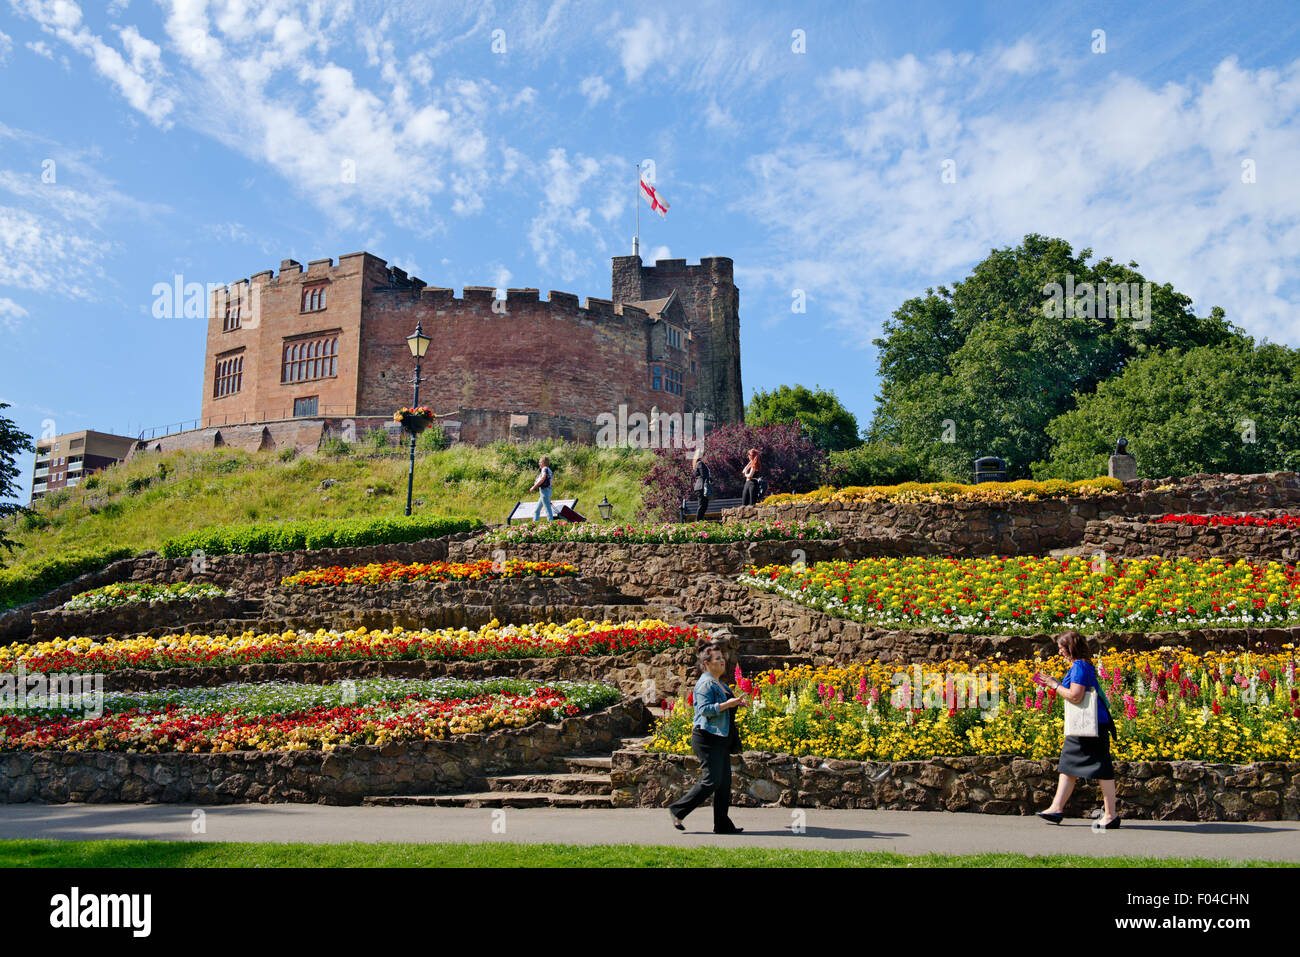 Tamworth Castle and flower beds garden in bloom, Staffordshire Stock Photo